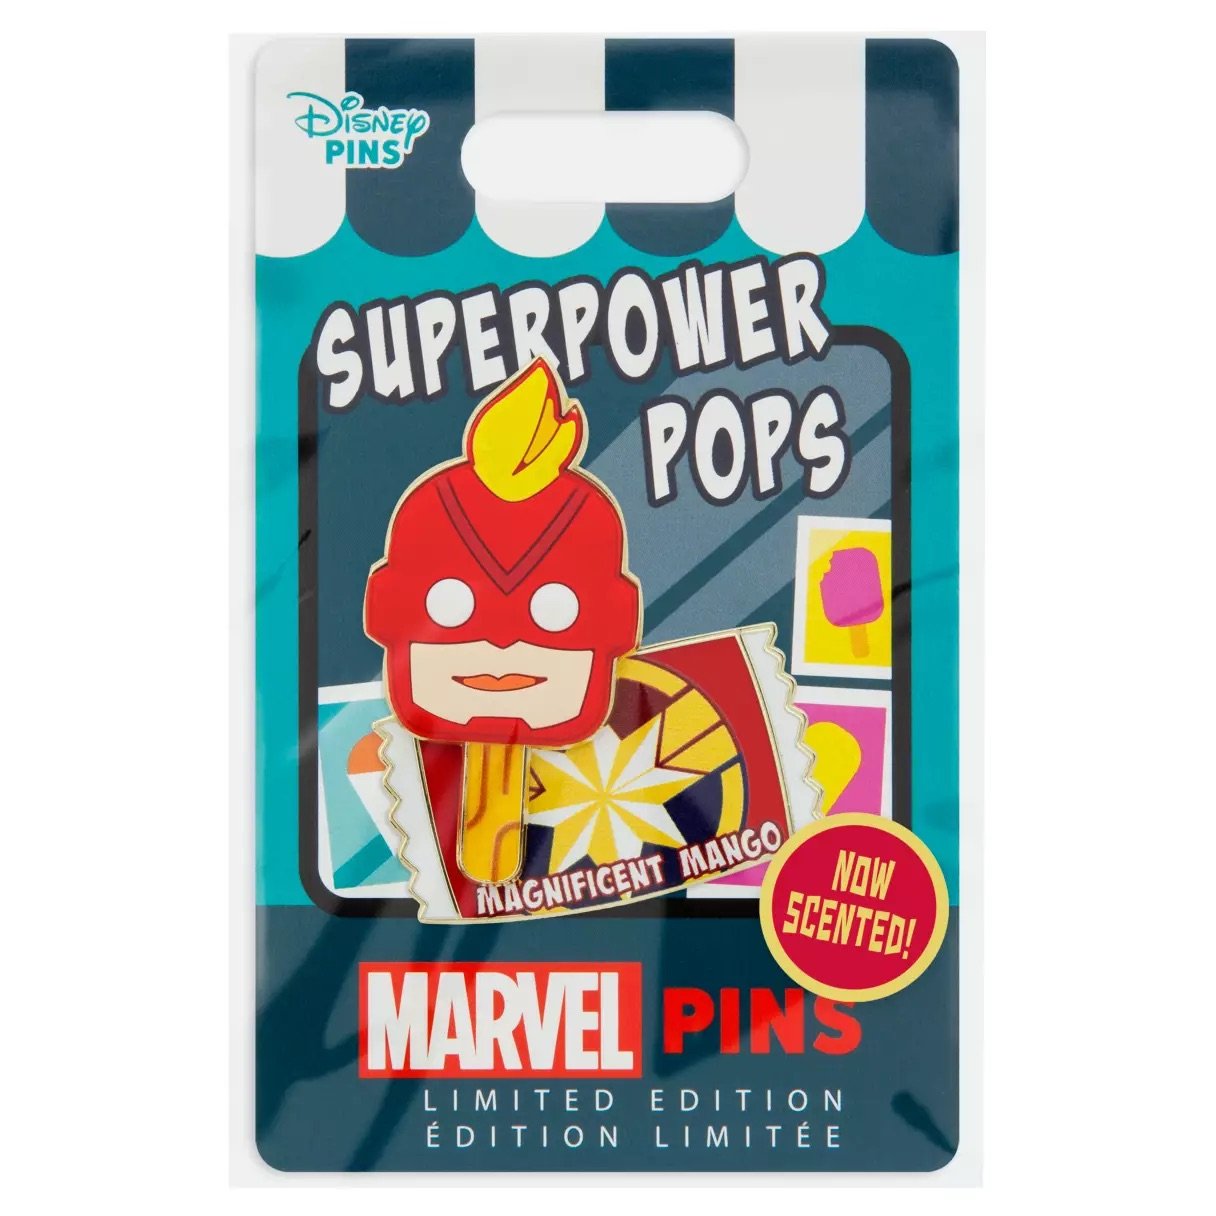 Captain Marvel Magnificent Mango Superpower Pops Pin